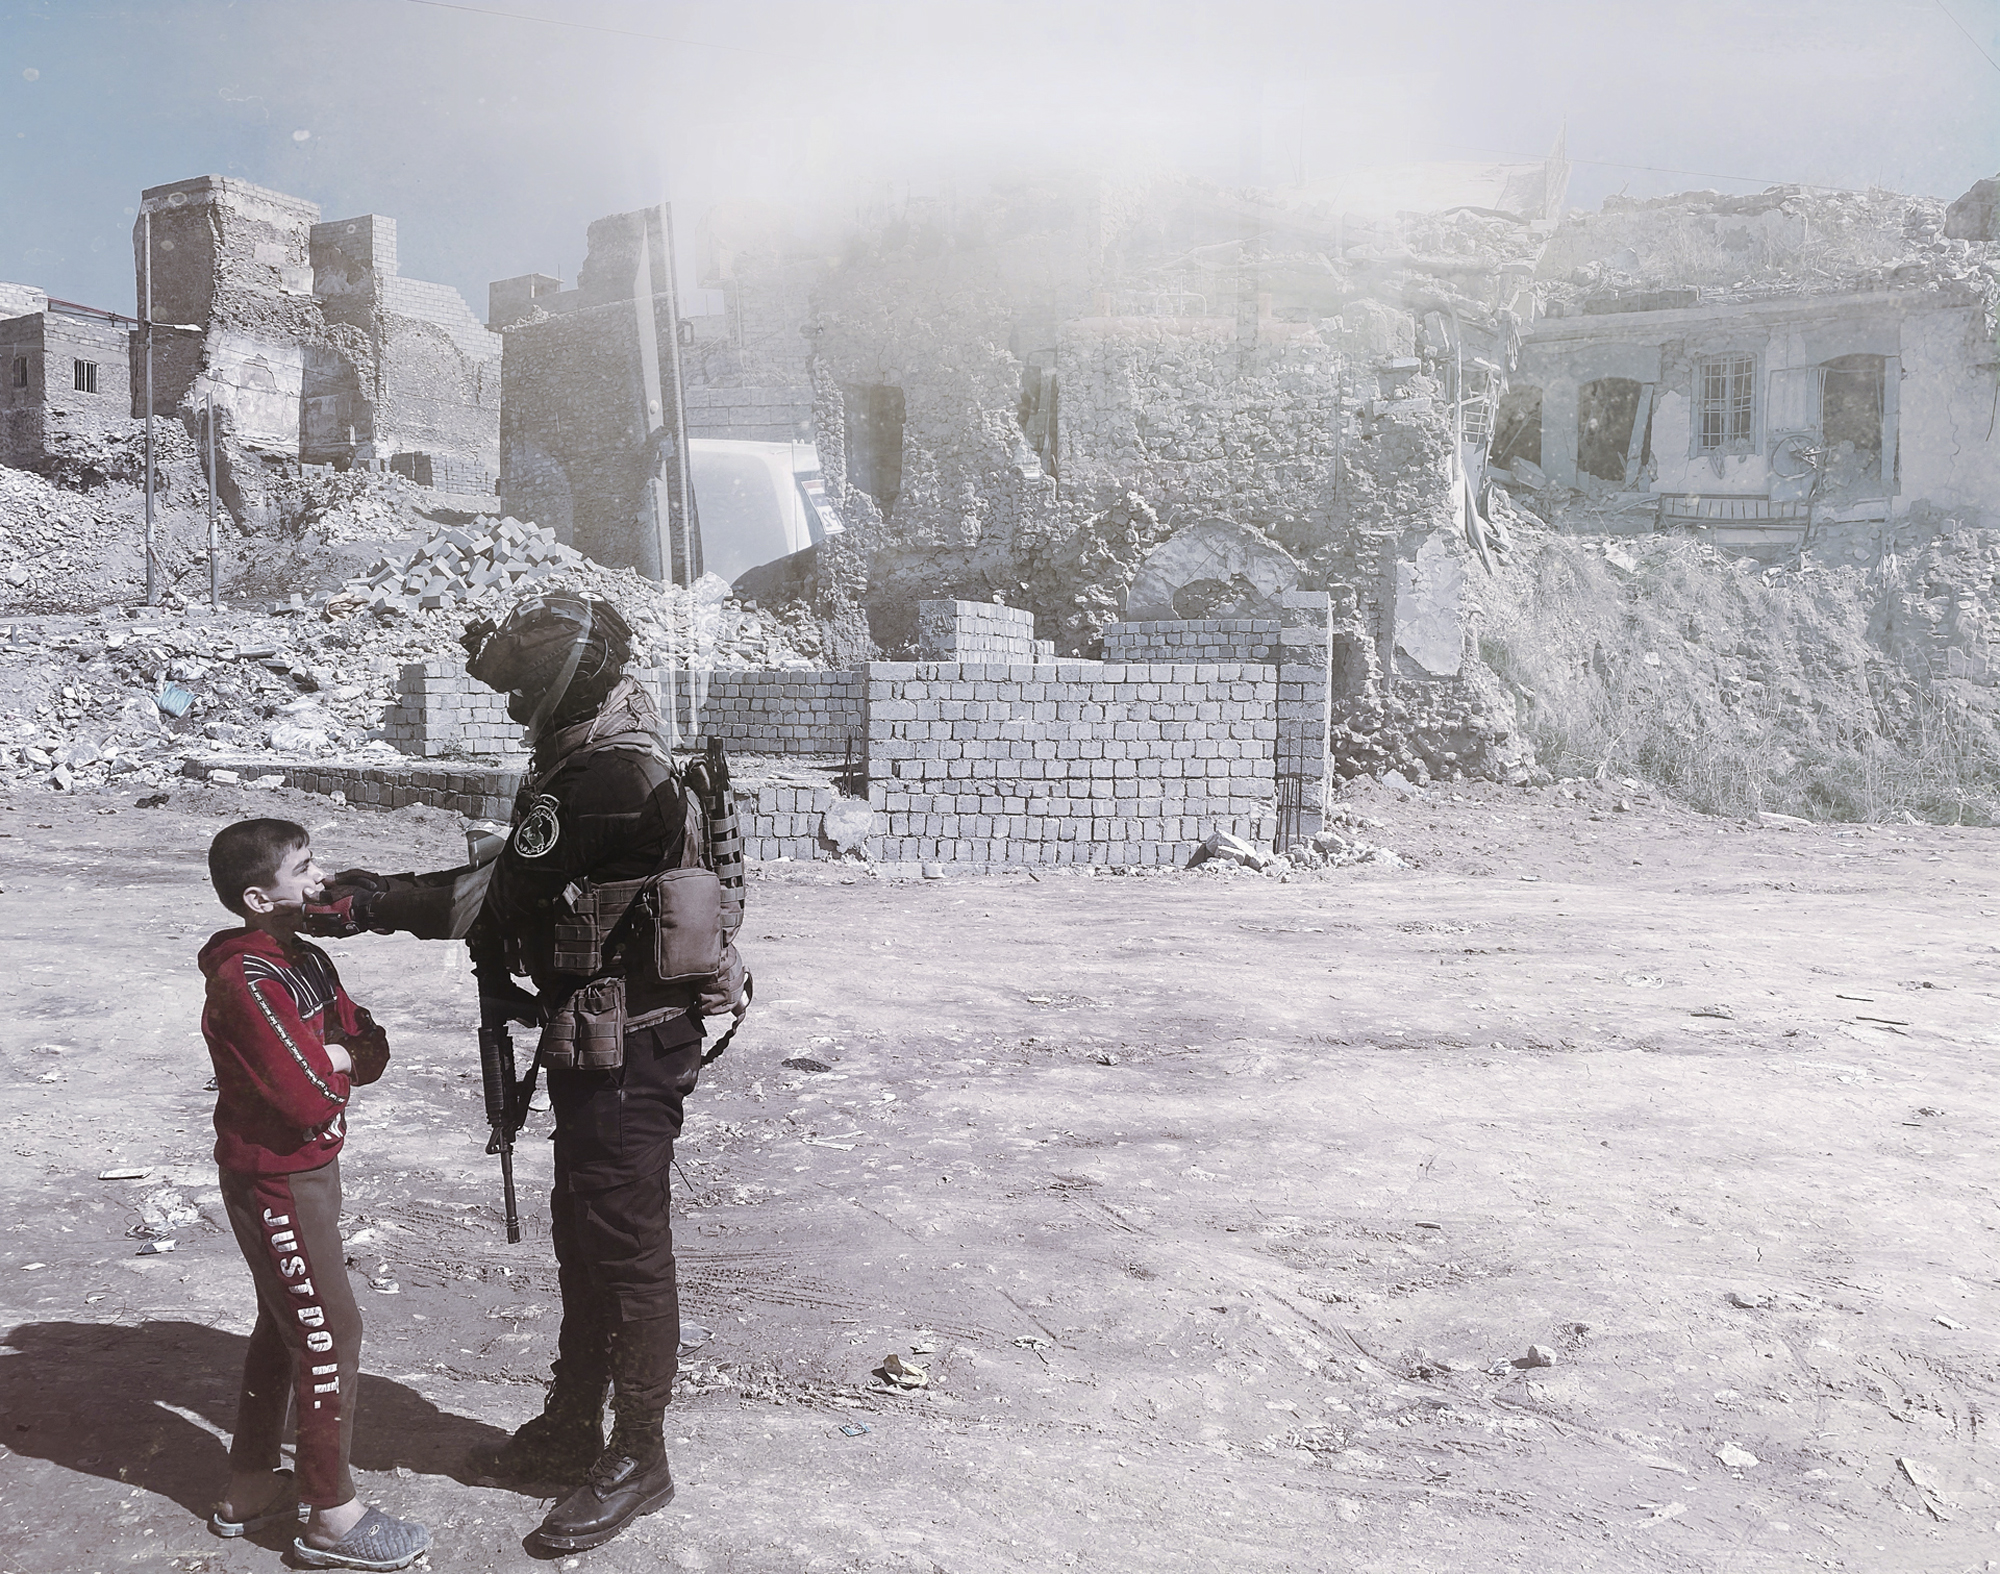 A soldier talking to a boy in front of ruins